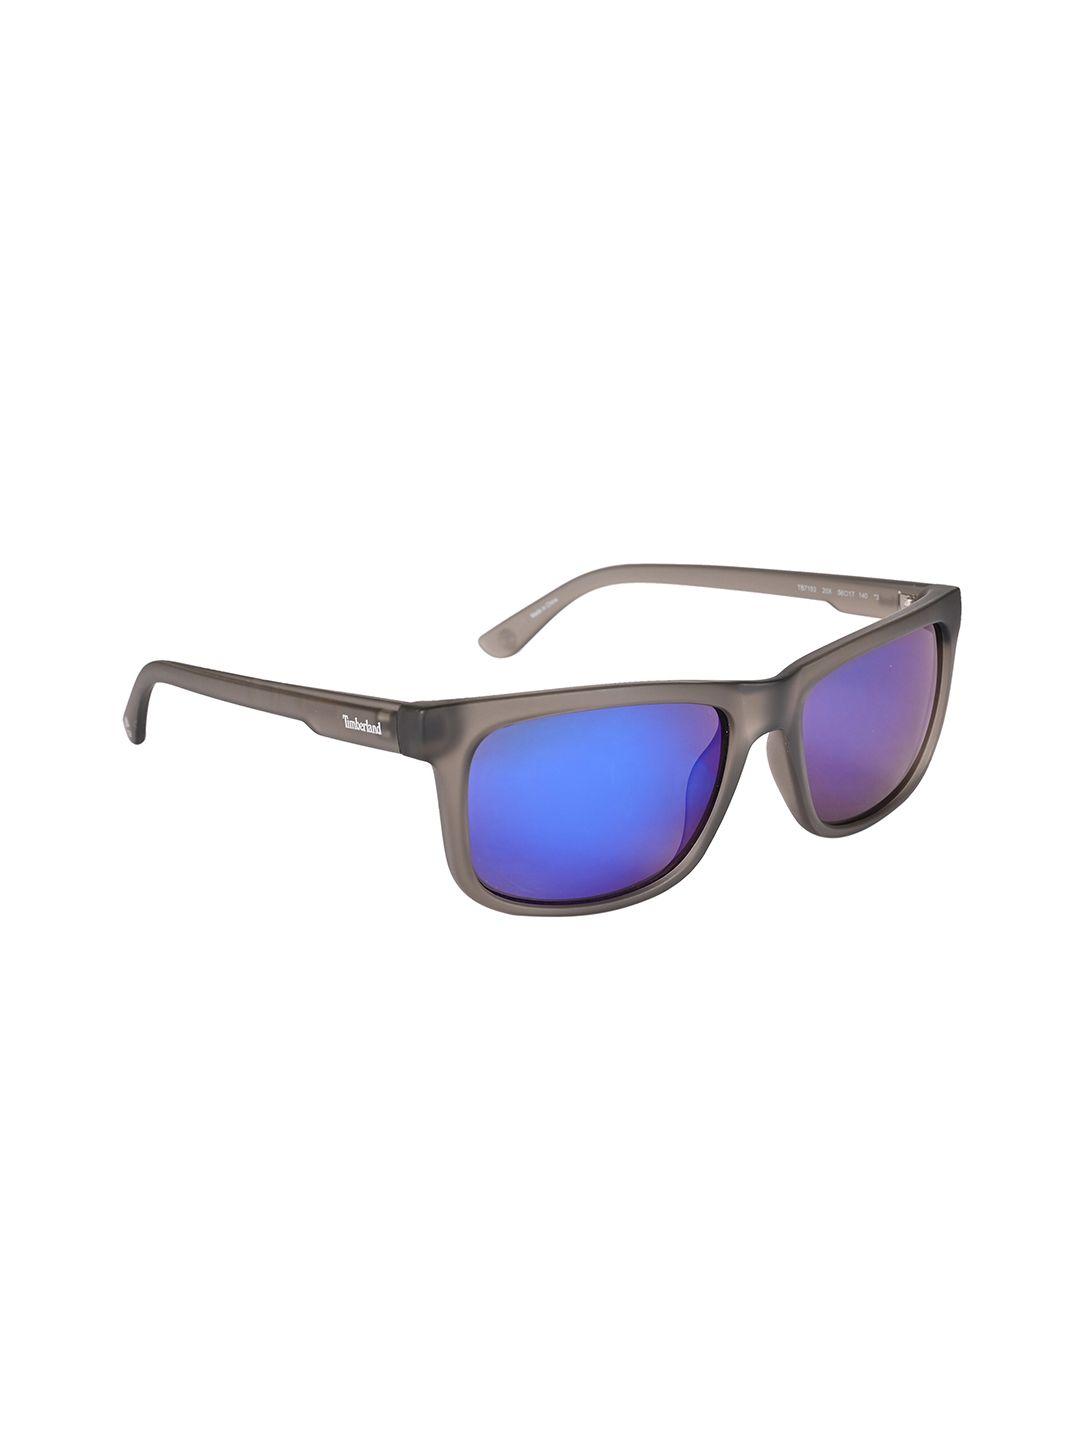 timberland-men-square-sunglasses-with-uv-protected-lens